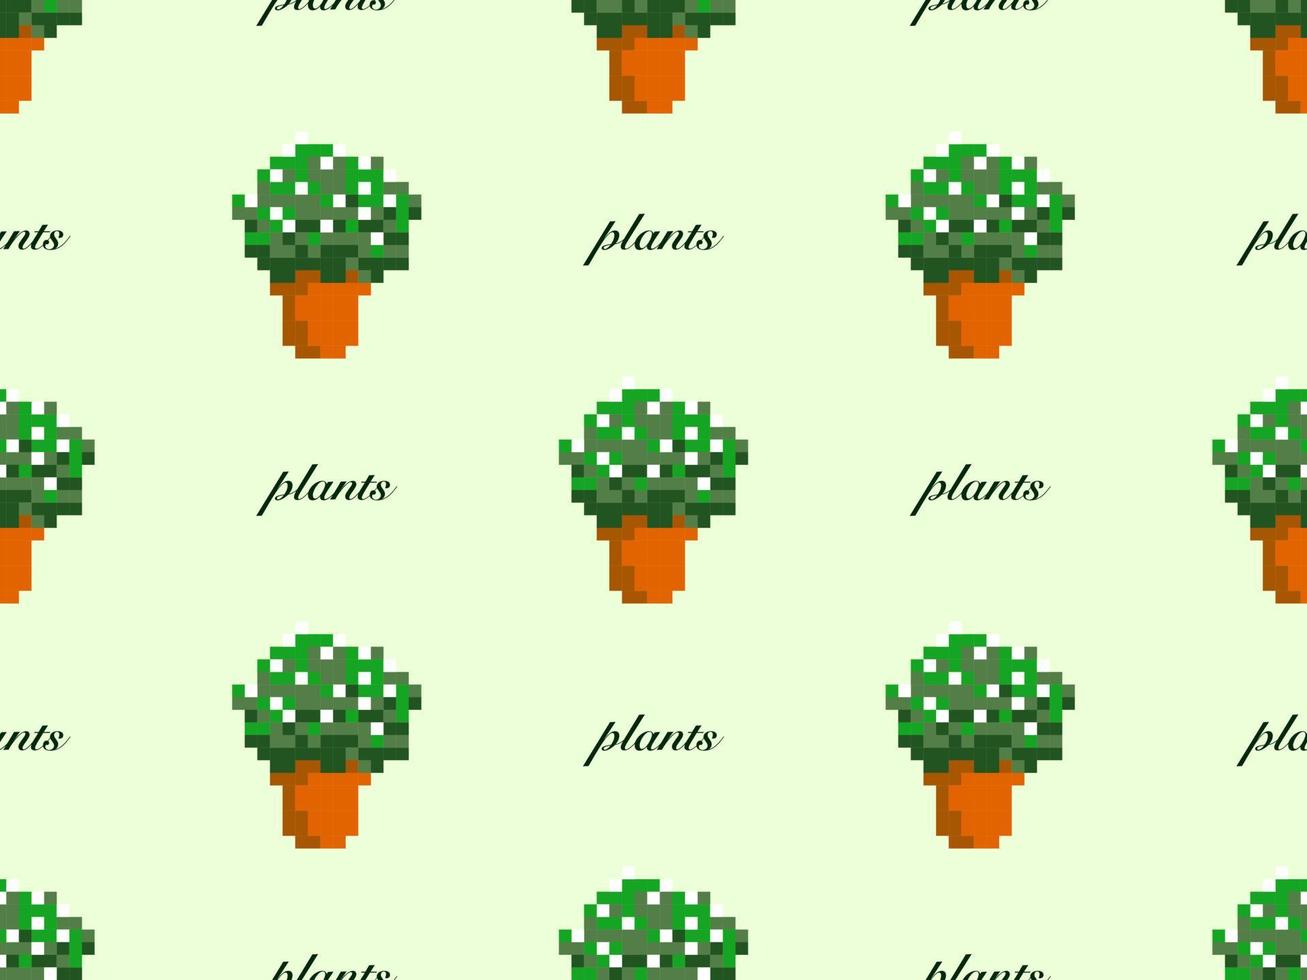 Plants cartoon character seamless pattern on green background. Pixel style vector